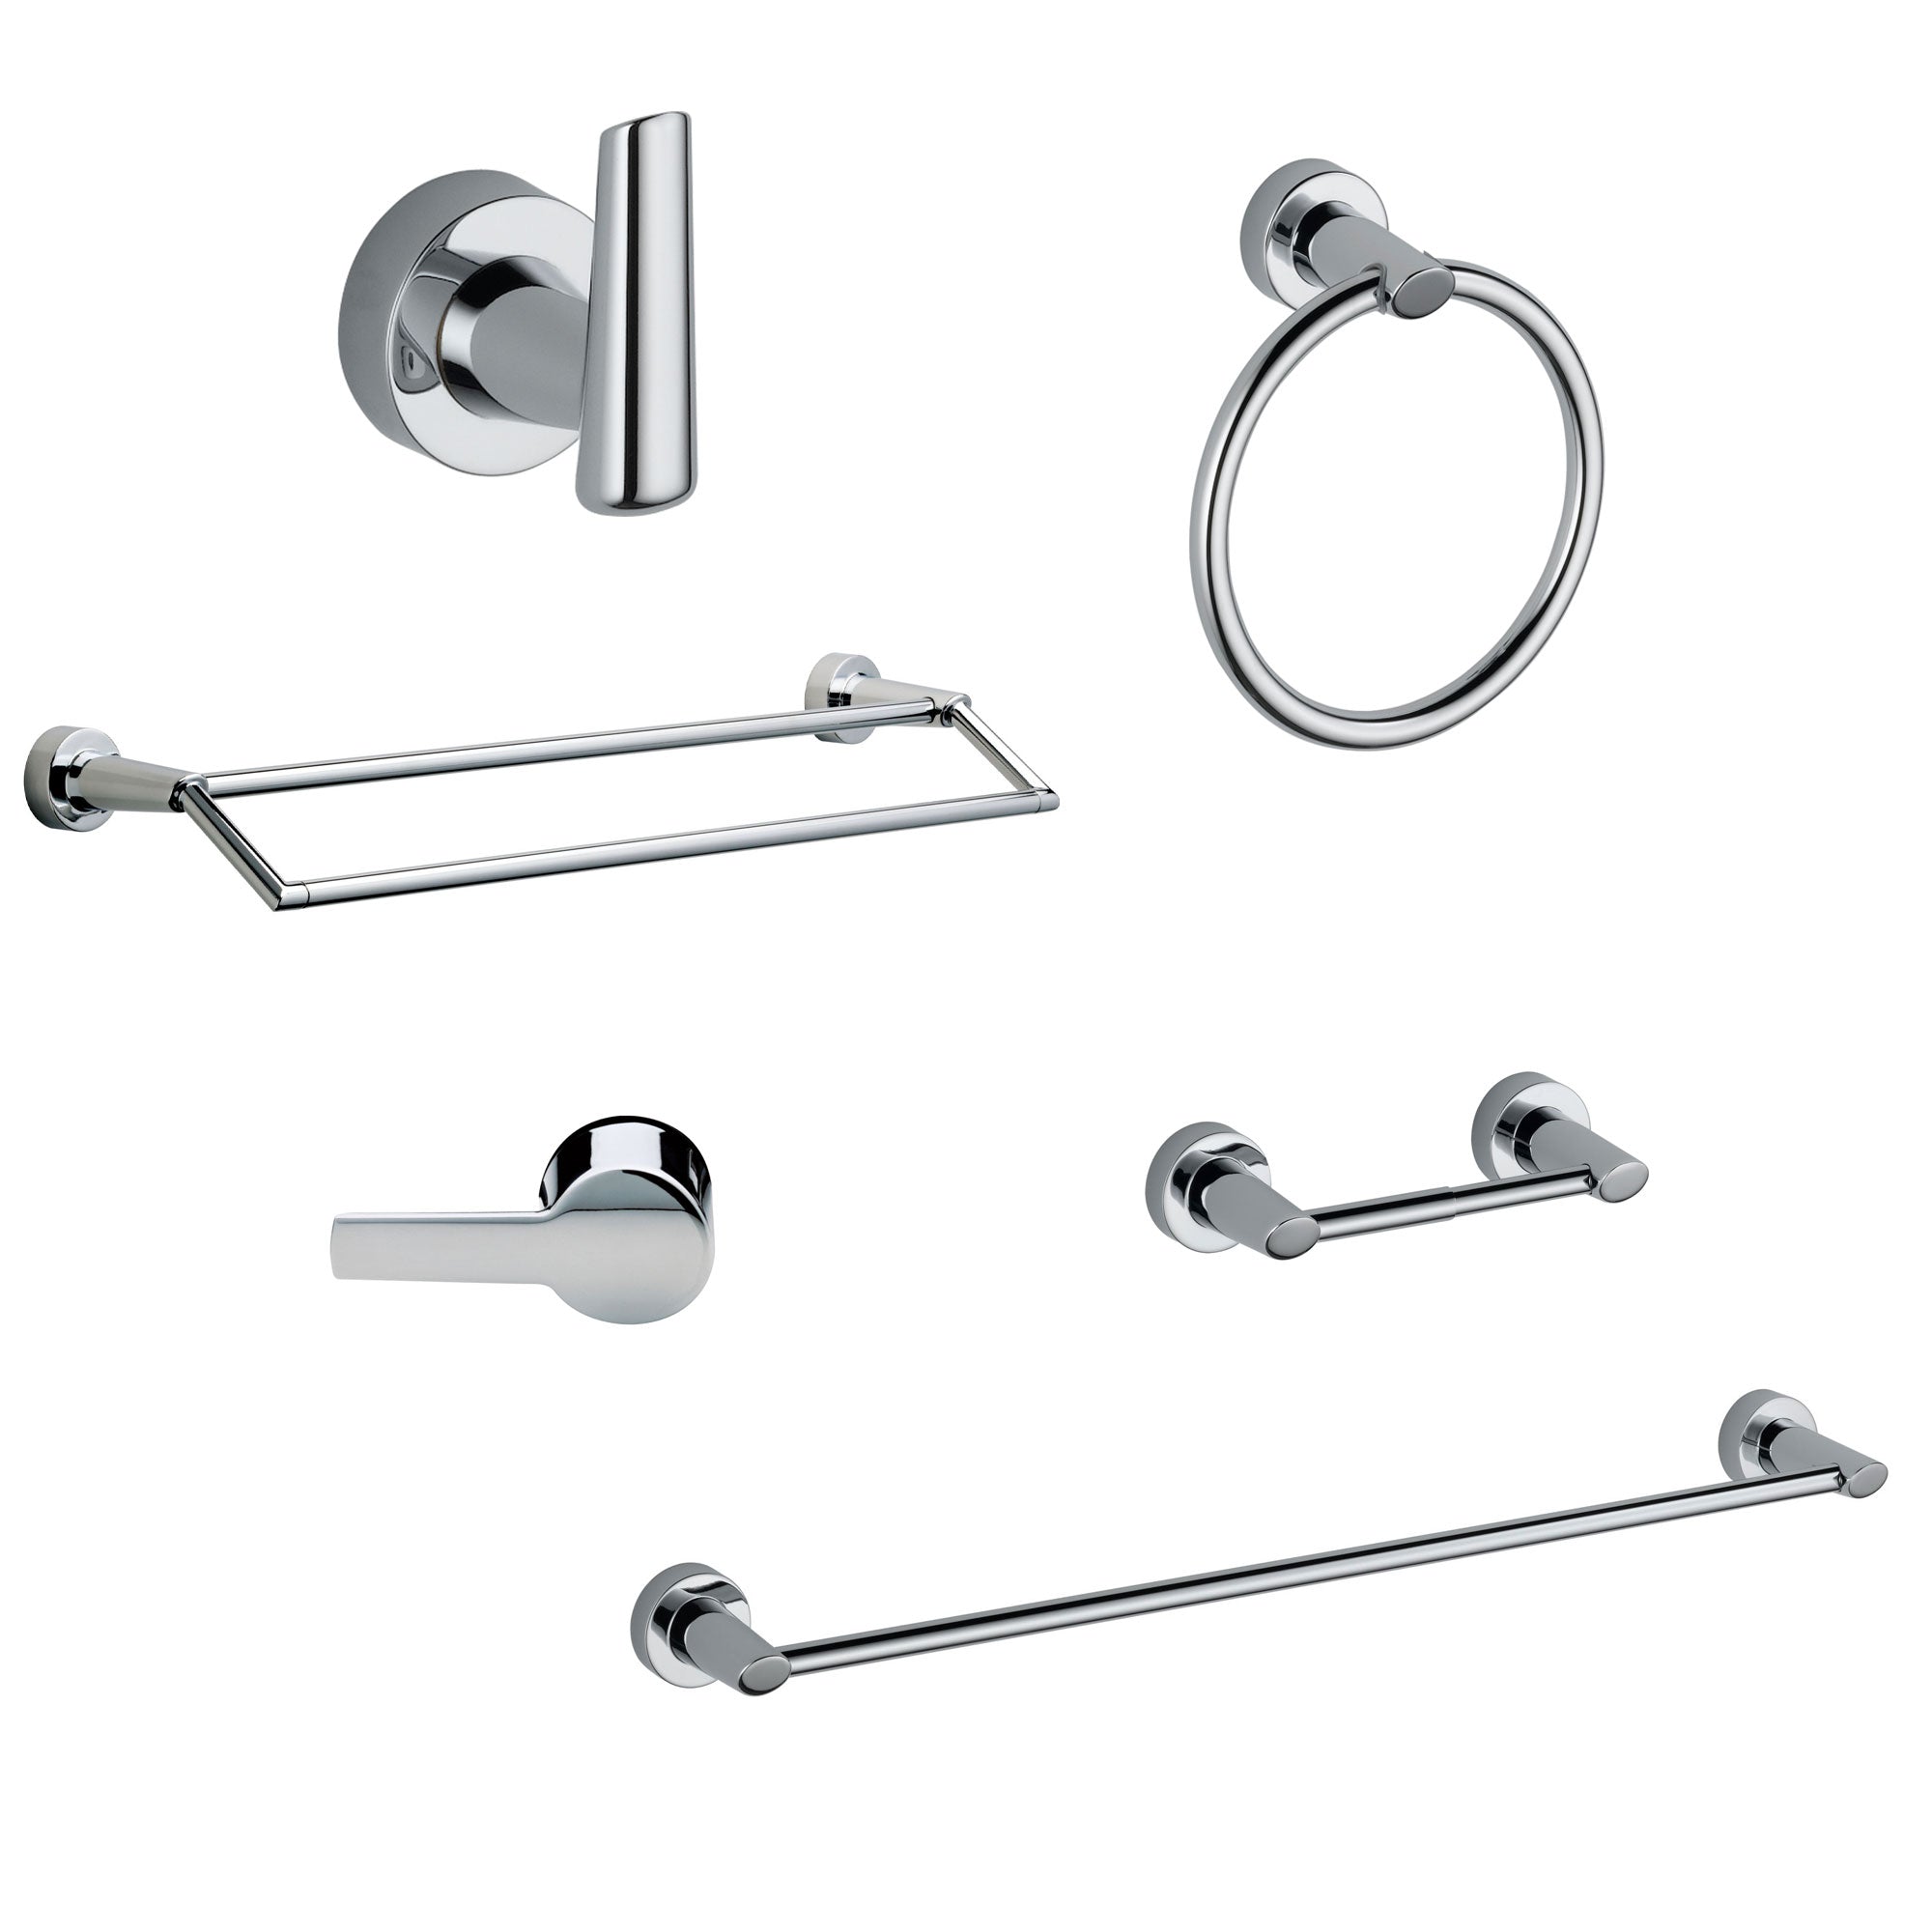 Delta Compel Chrome DELUXE Accessory Set Includes: 24" Towel Bar, Paper Holder, Robe Hook, Towel Ring, Tank Lever, and Double Towel Bar D10073AP